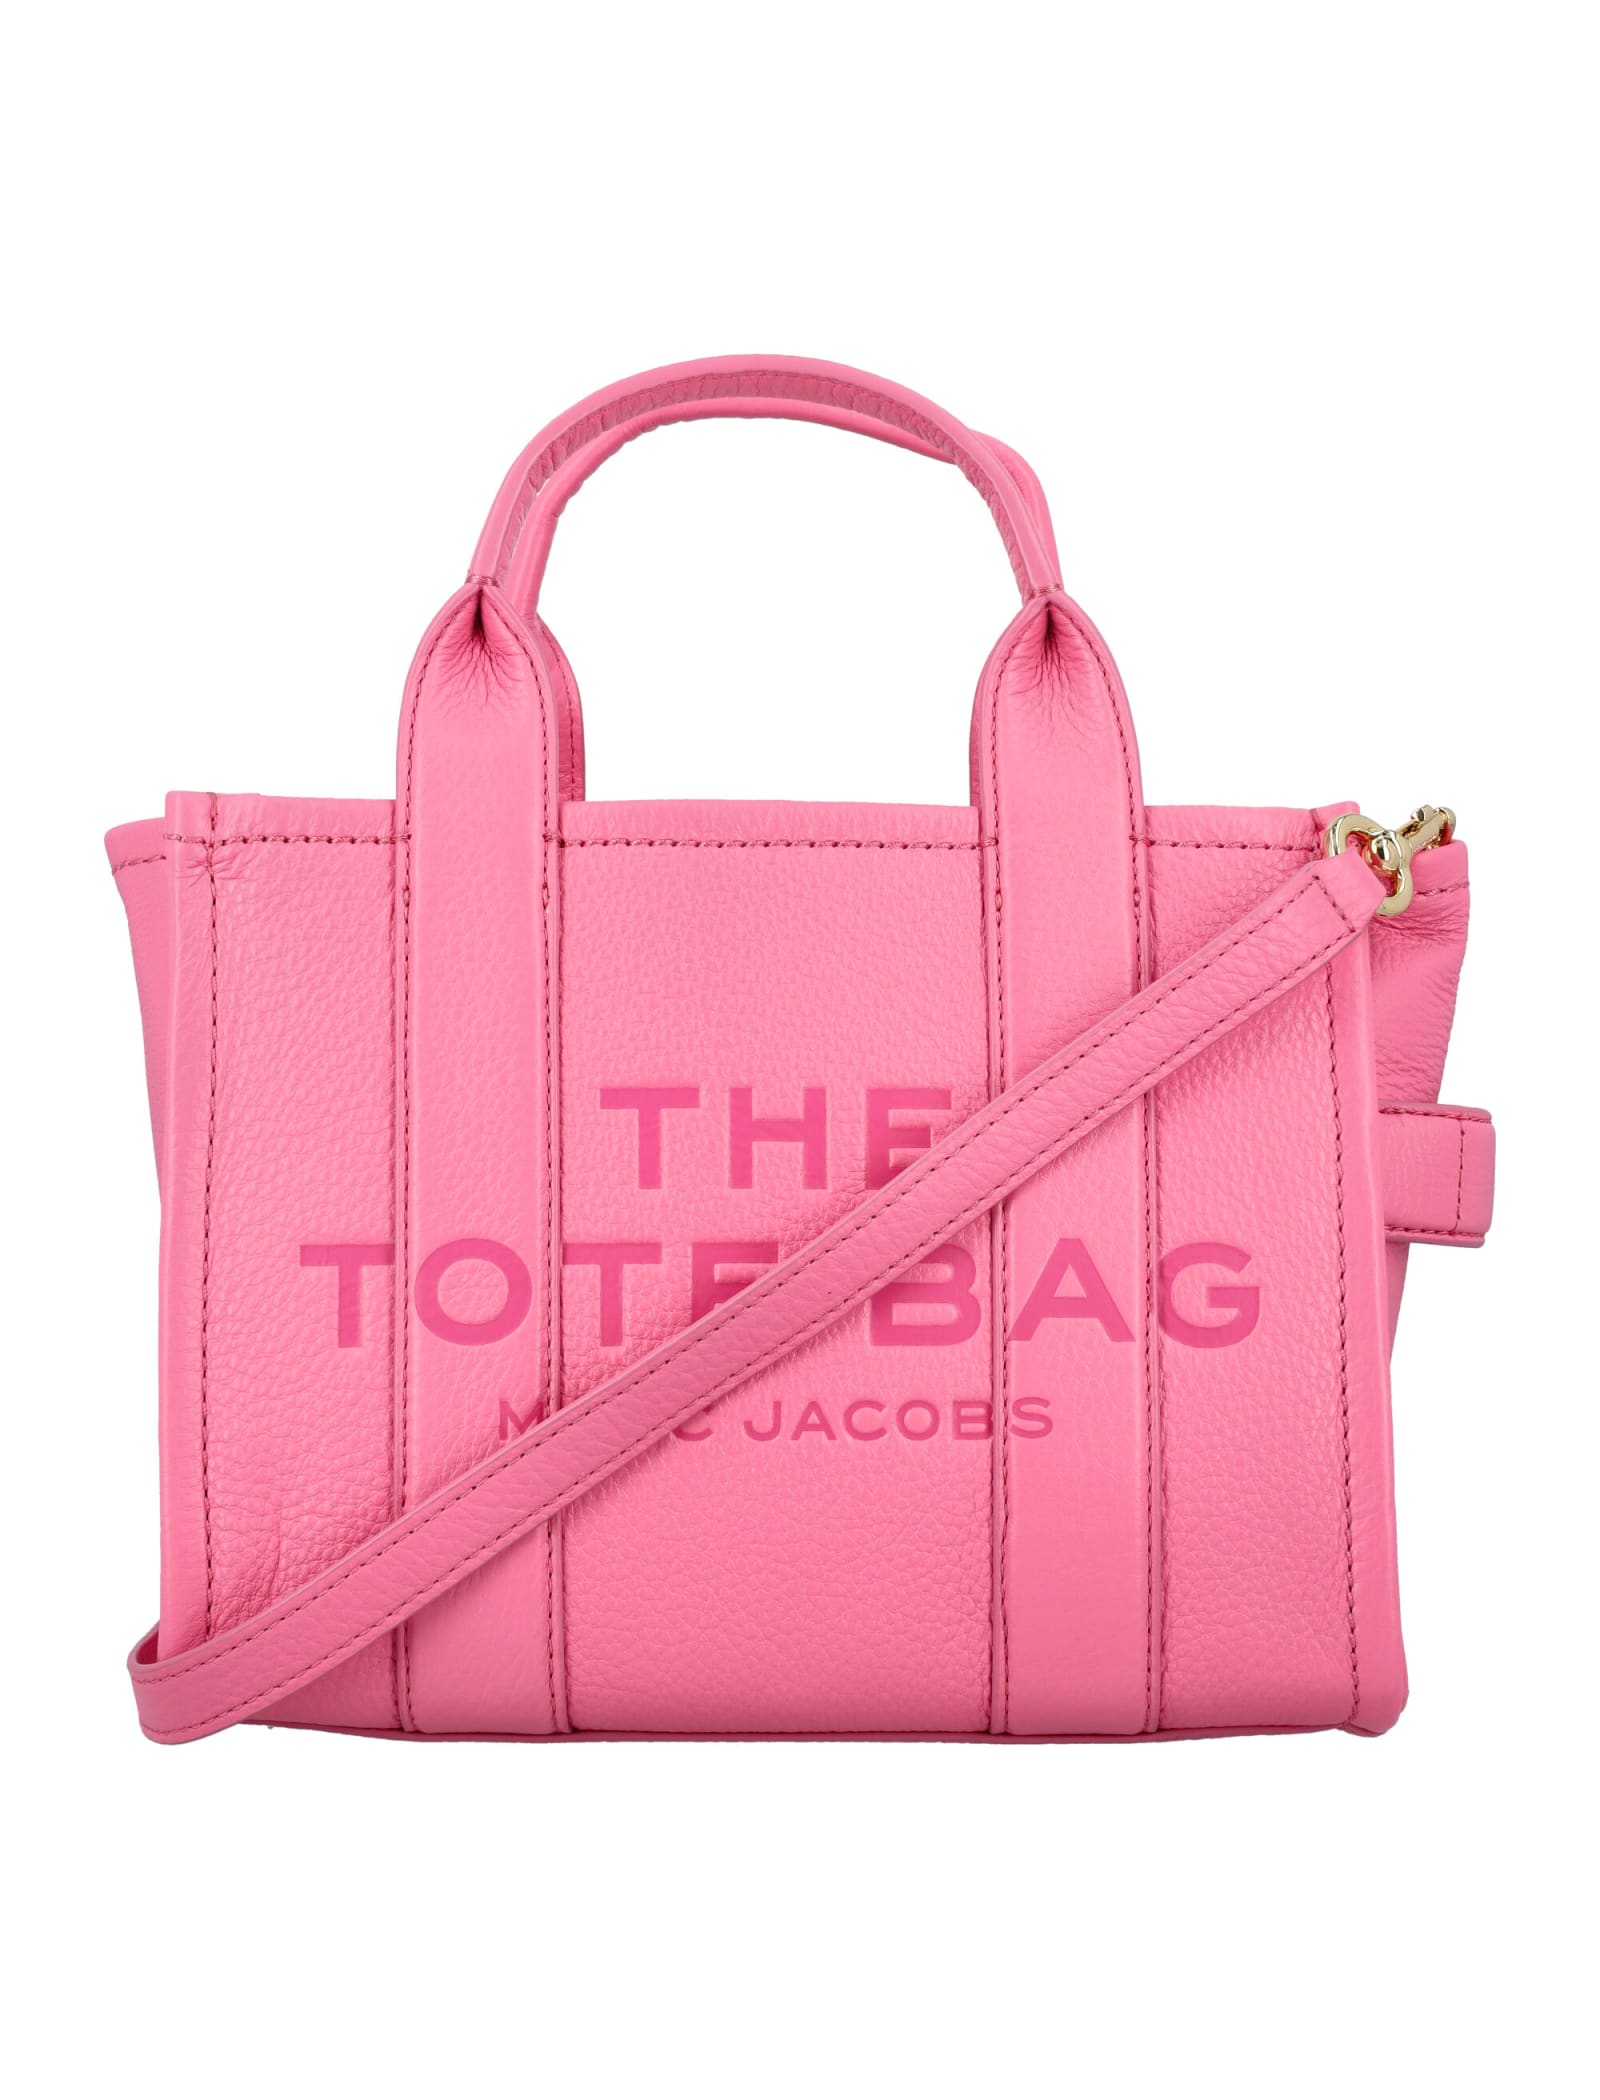 Marc Jacobs The Mini Leather Tote Bag In Morning Glory